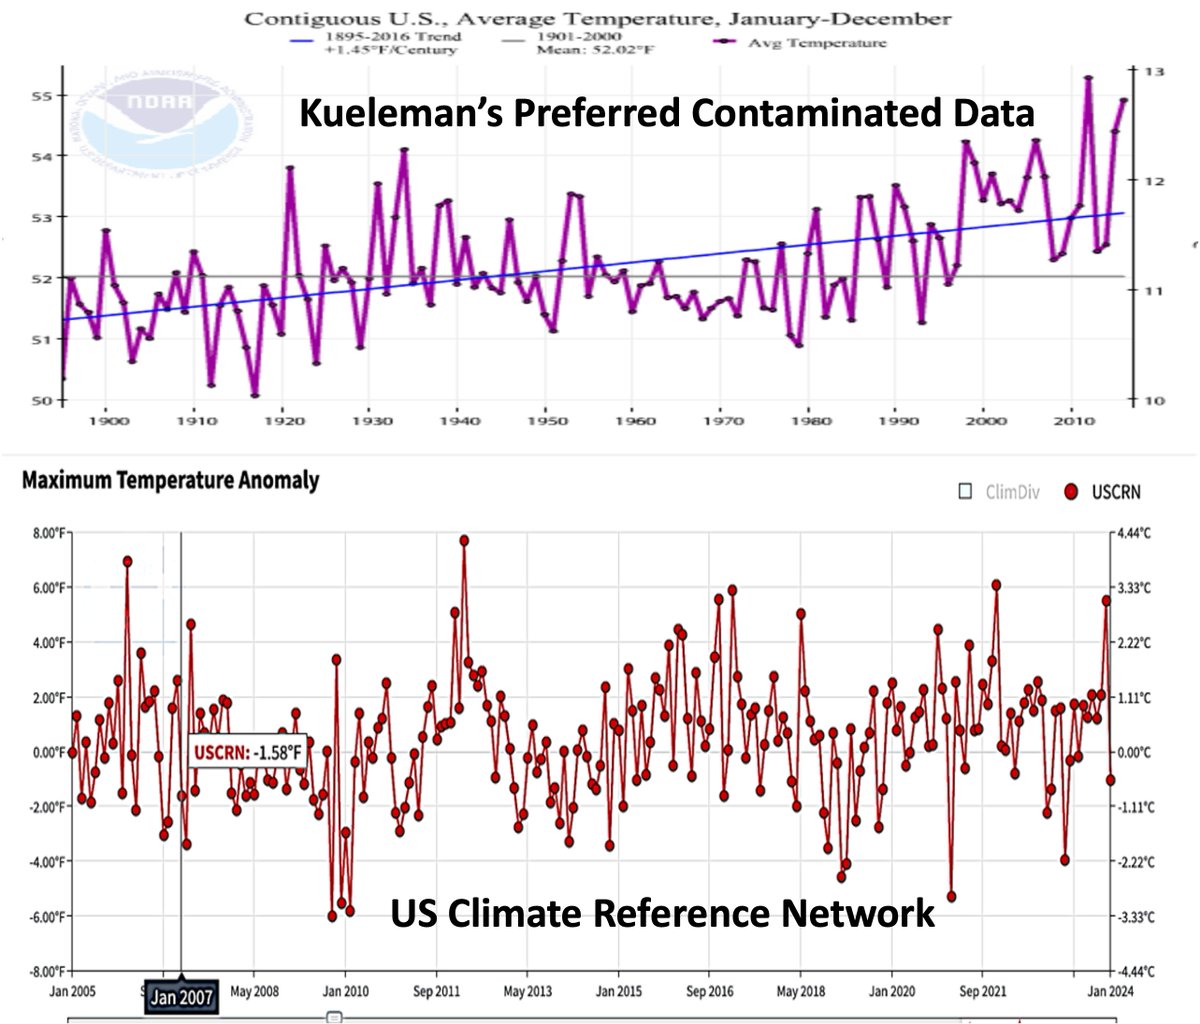 4/20 The Best USA temperature Statistic! (Focusing Maarten Keulemans @mkeulemans This is the fourth of 20 tweets illustrating how dishonest climate alarmist propagandists try to suppress all scientific debate that exposes the bad science pushing a climate crisis. Maarten…